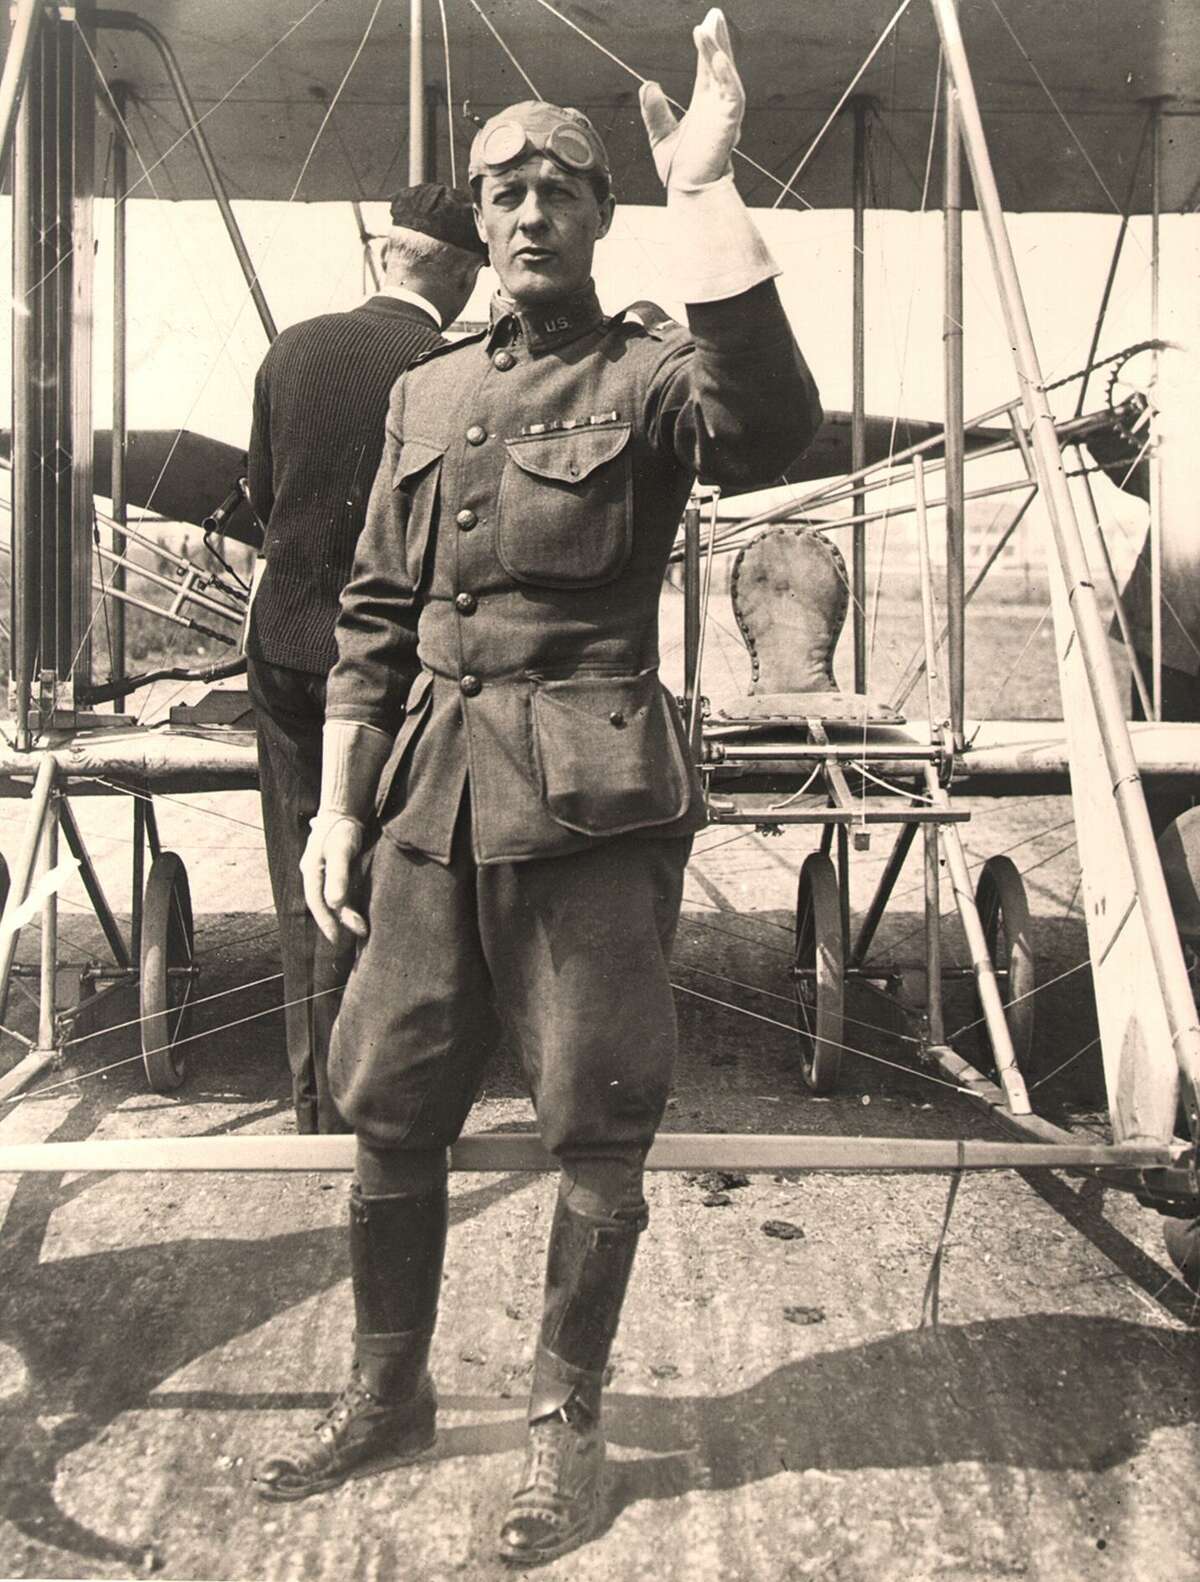 Then-Capt. Benjamin Foulois, who made the first successful powered military flight in 1910, poses in front of a seaplane in this undated photo.